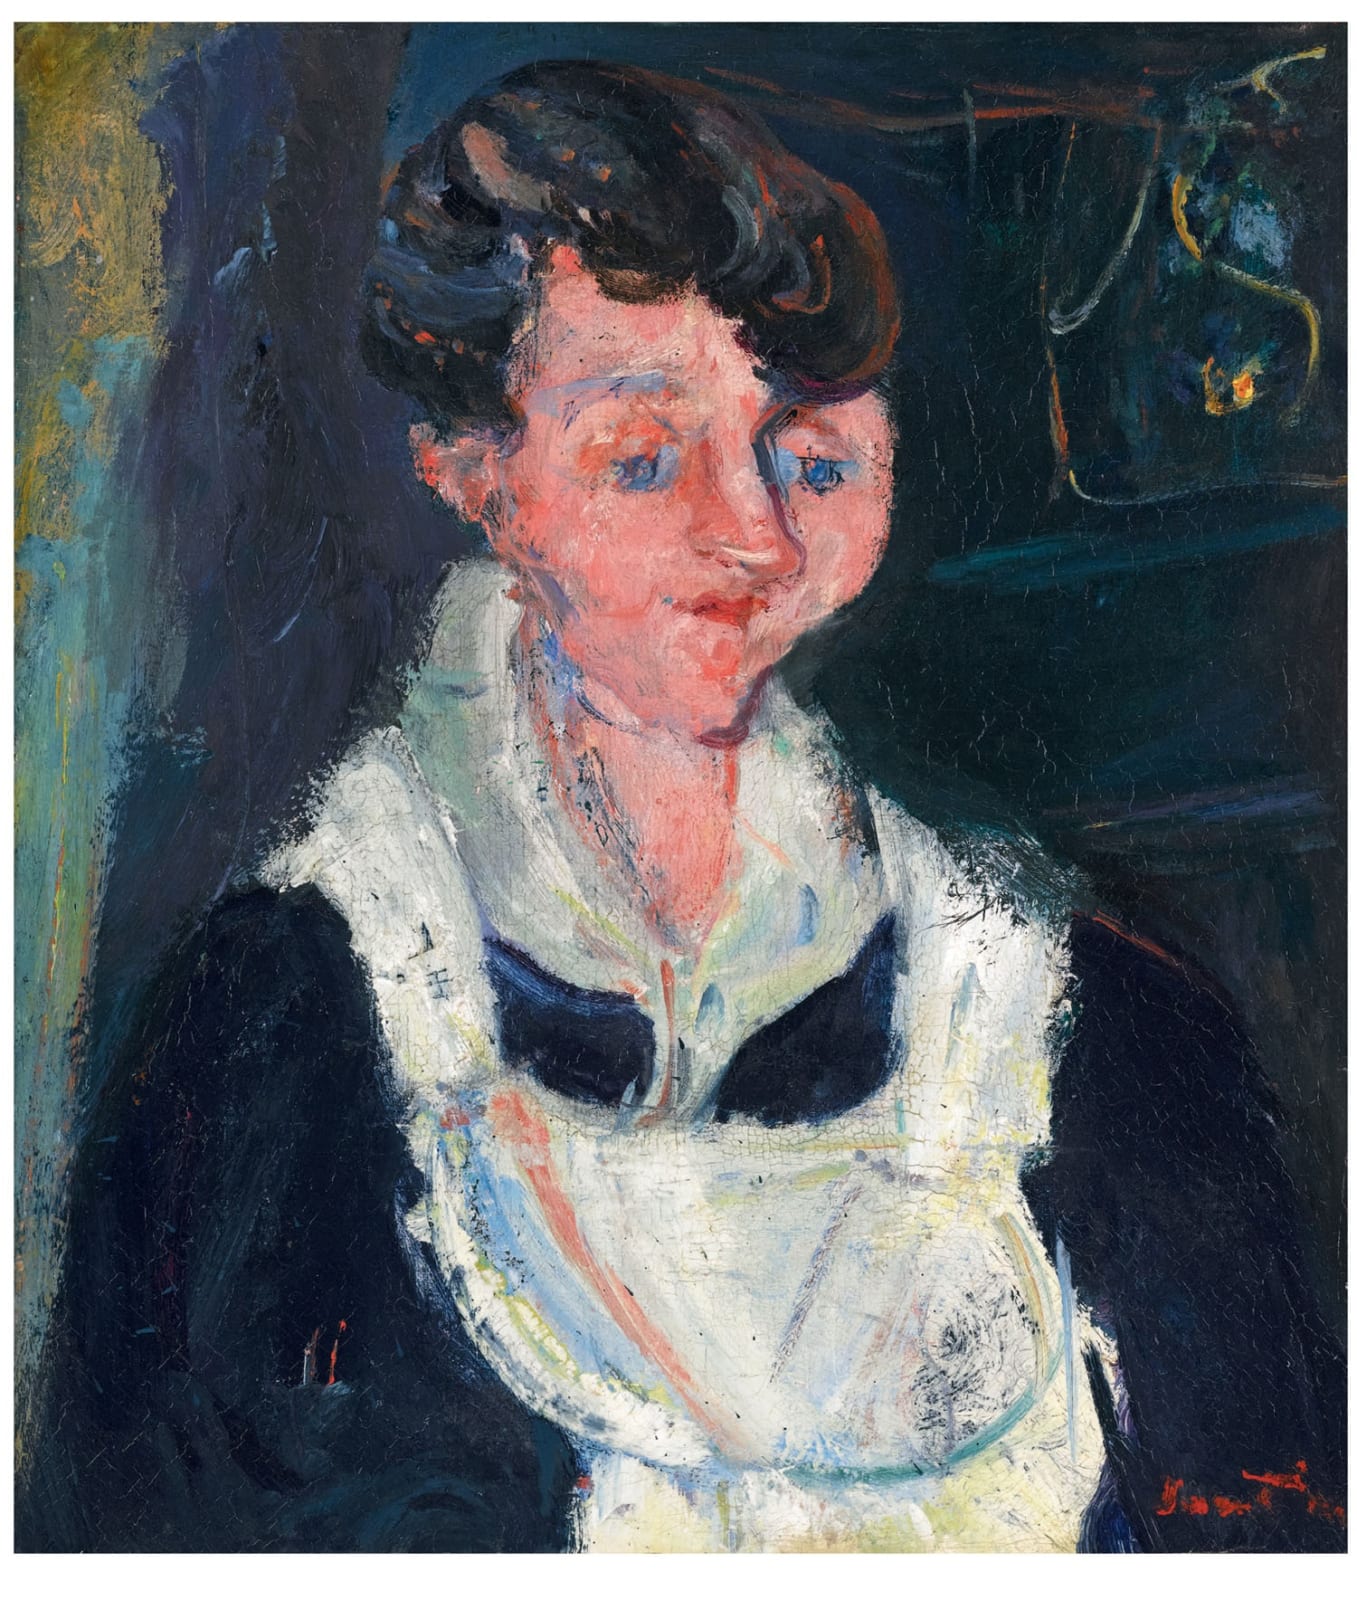 Chaïm Soutine (1893-1943) Jeune Servante (Waiting Maid, also known as La Soubrette) c.1933 Oil on canvas 46.5 x 40.5 cm Ben Uri Collection Acquired in 2012 with the assistance of the HLF, Art Fund, the V&A Purchase Grant Fund, Miriam and Richard Borchard, Sir Harry and Lady Djanogly, Patsy & David Franks, Morven and Michael Heller, Joan and Lawrence Kaye (USA), Laura and Lewis Kruger (USA), Agnes & Edward Lee, Simon Posen (USA), The Marc Rich Foundation (Switzerland), Anthony Rosenfelder & family in honour of Marilyn, Jayne Cohen and Howard Spiegler (USA), and Judit & George Weisz